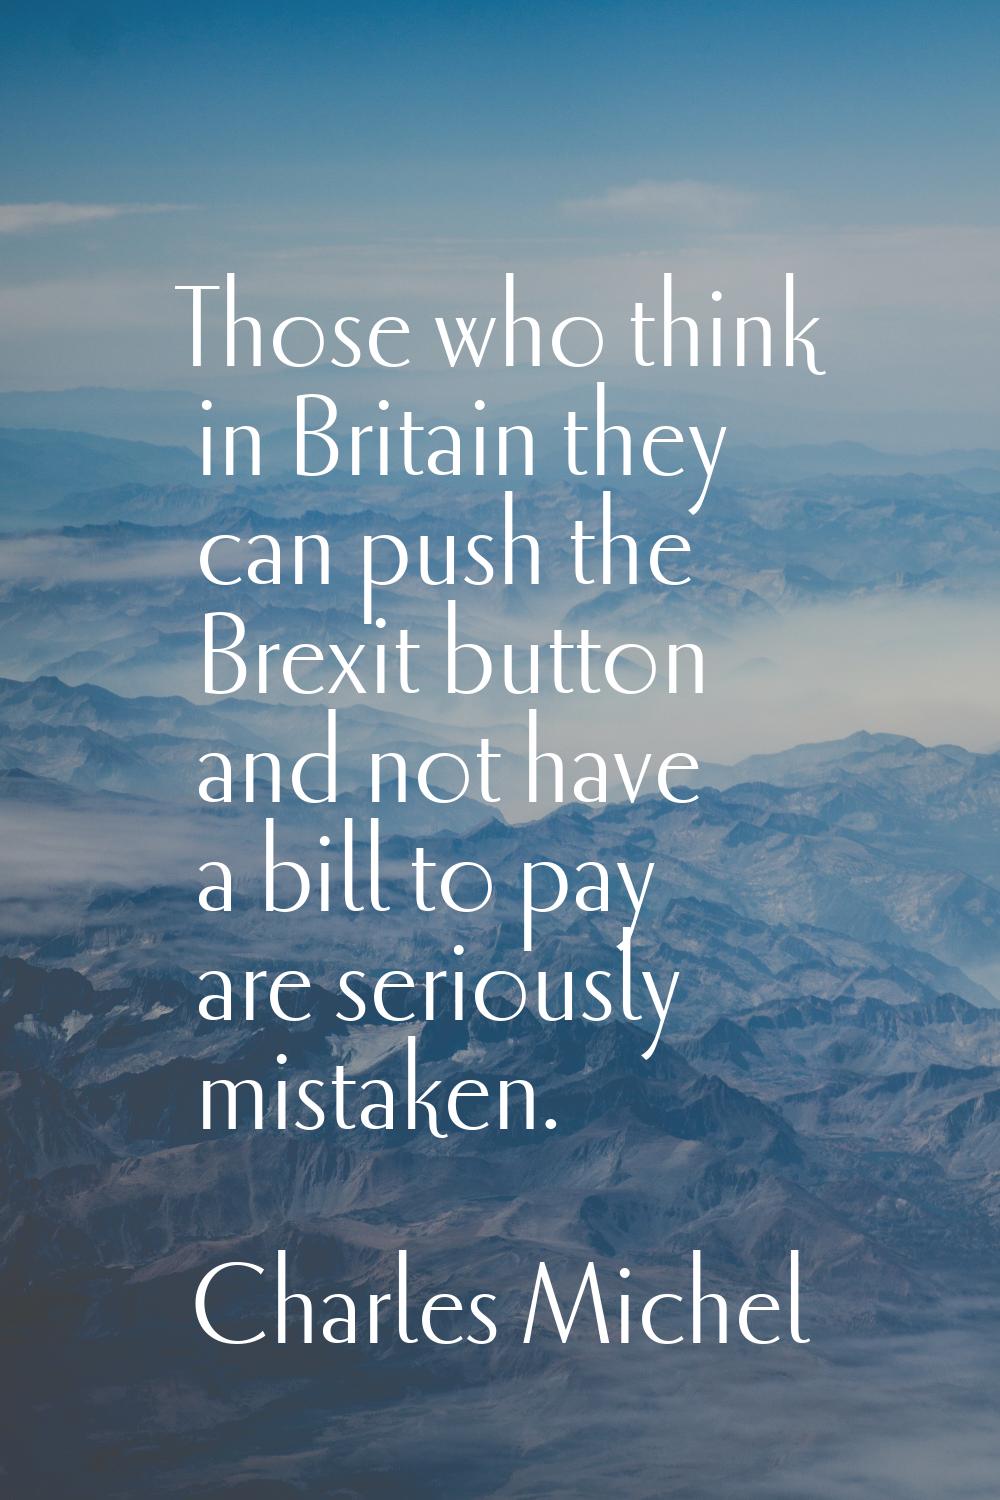 Those who think in Britain they can push the Brexit button and not have a bill to pay are seriously